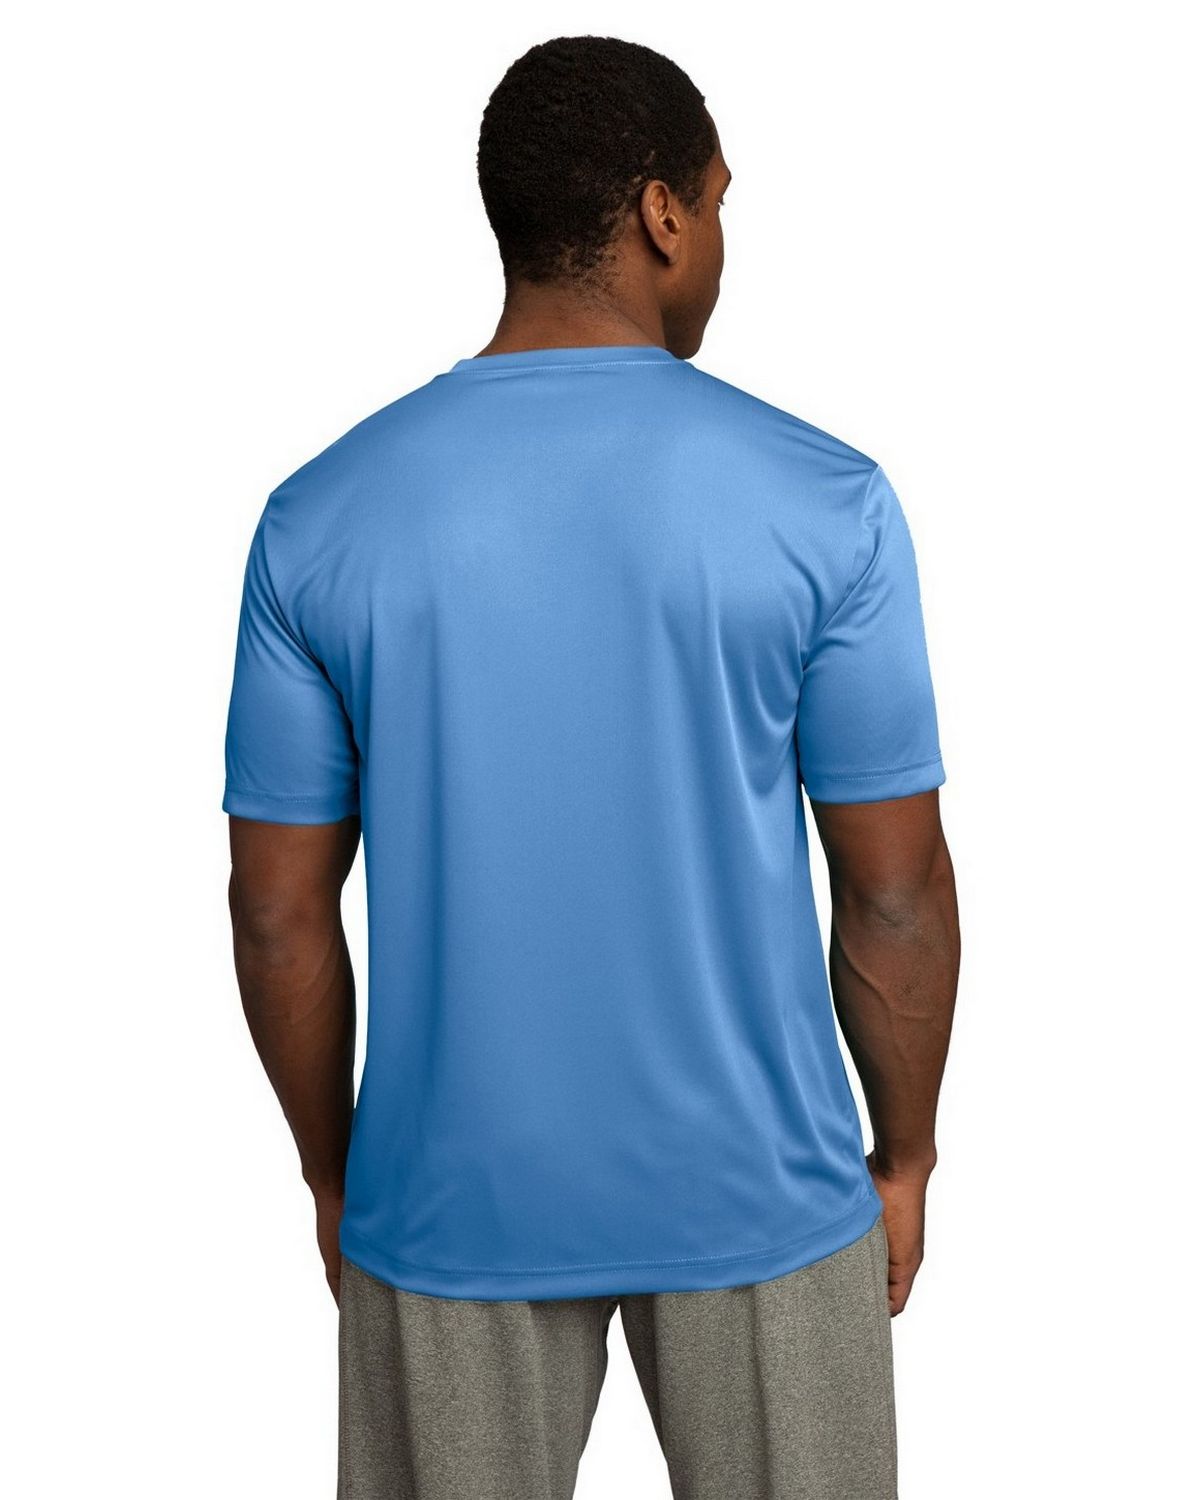 Sport-Tek ST350 Competitor Tee by Port Authority - ApparelnBags.com